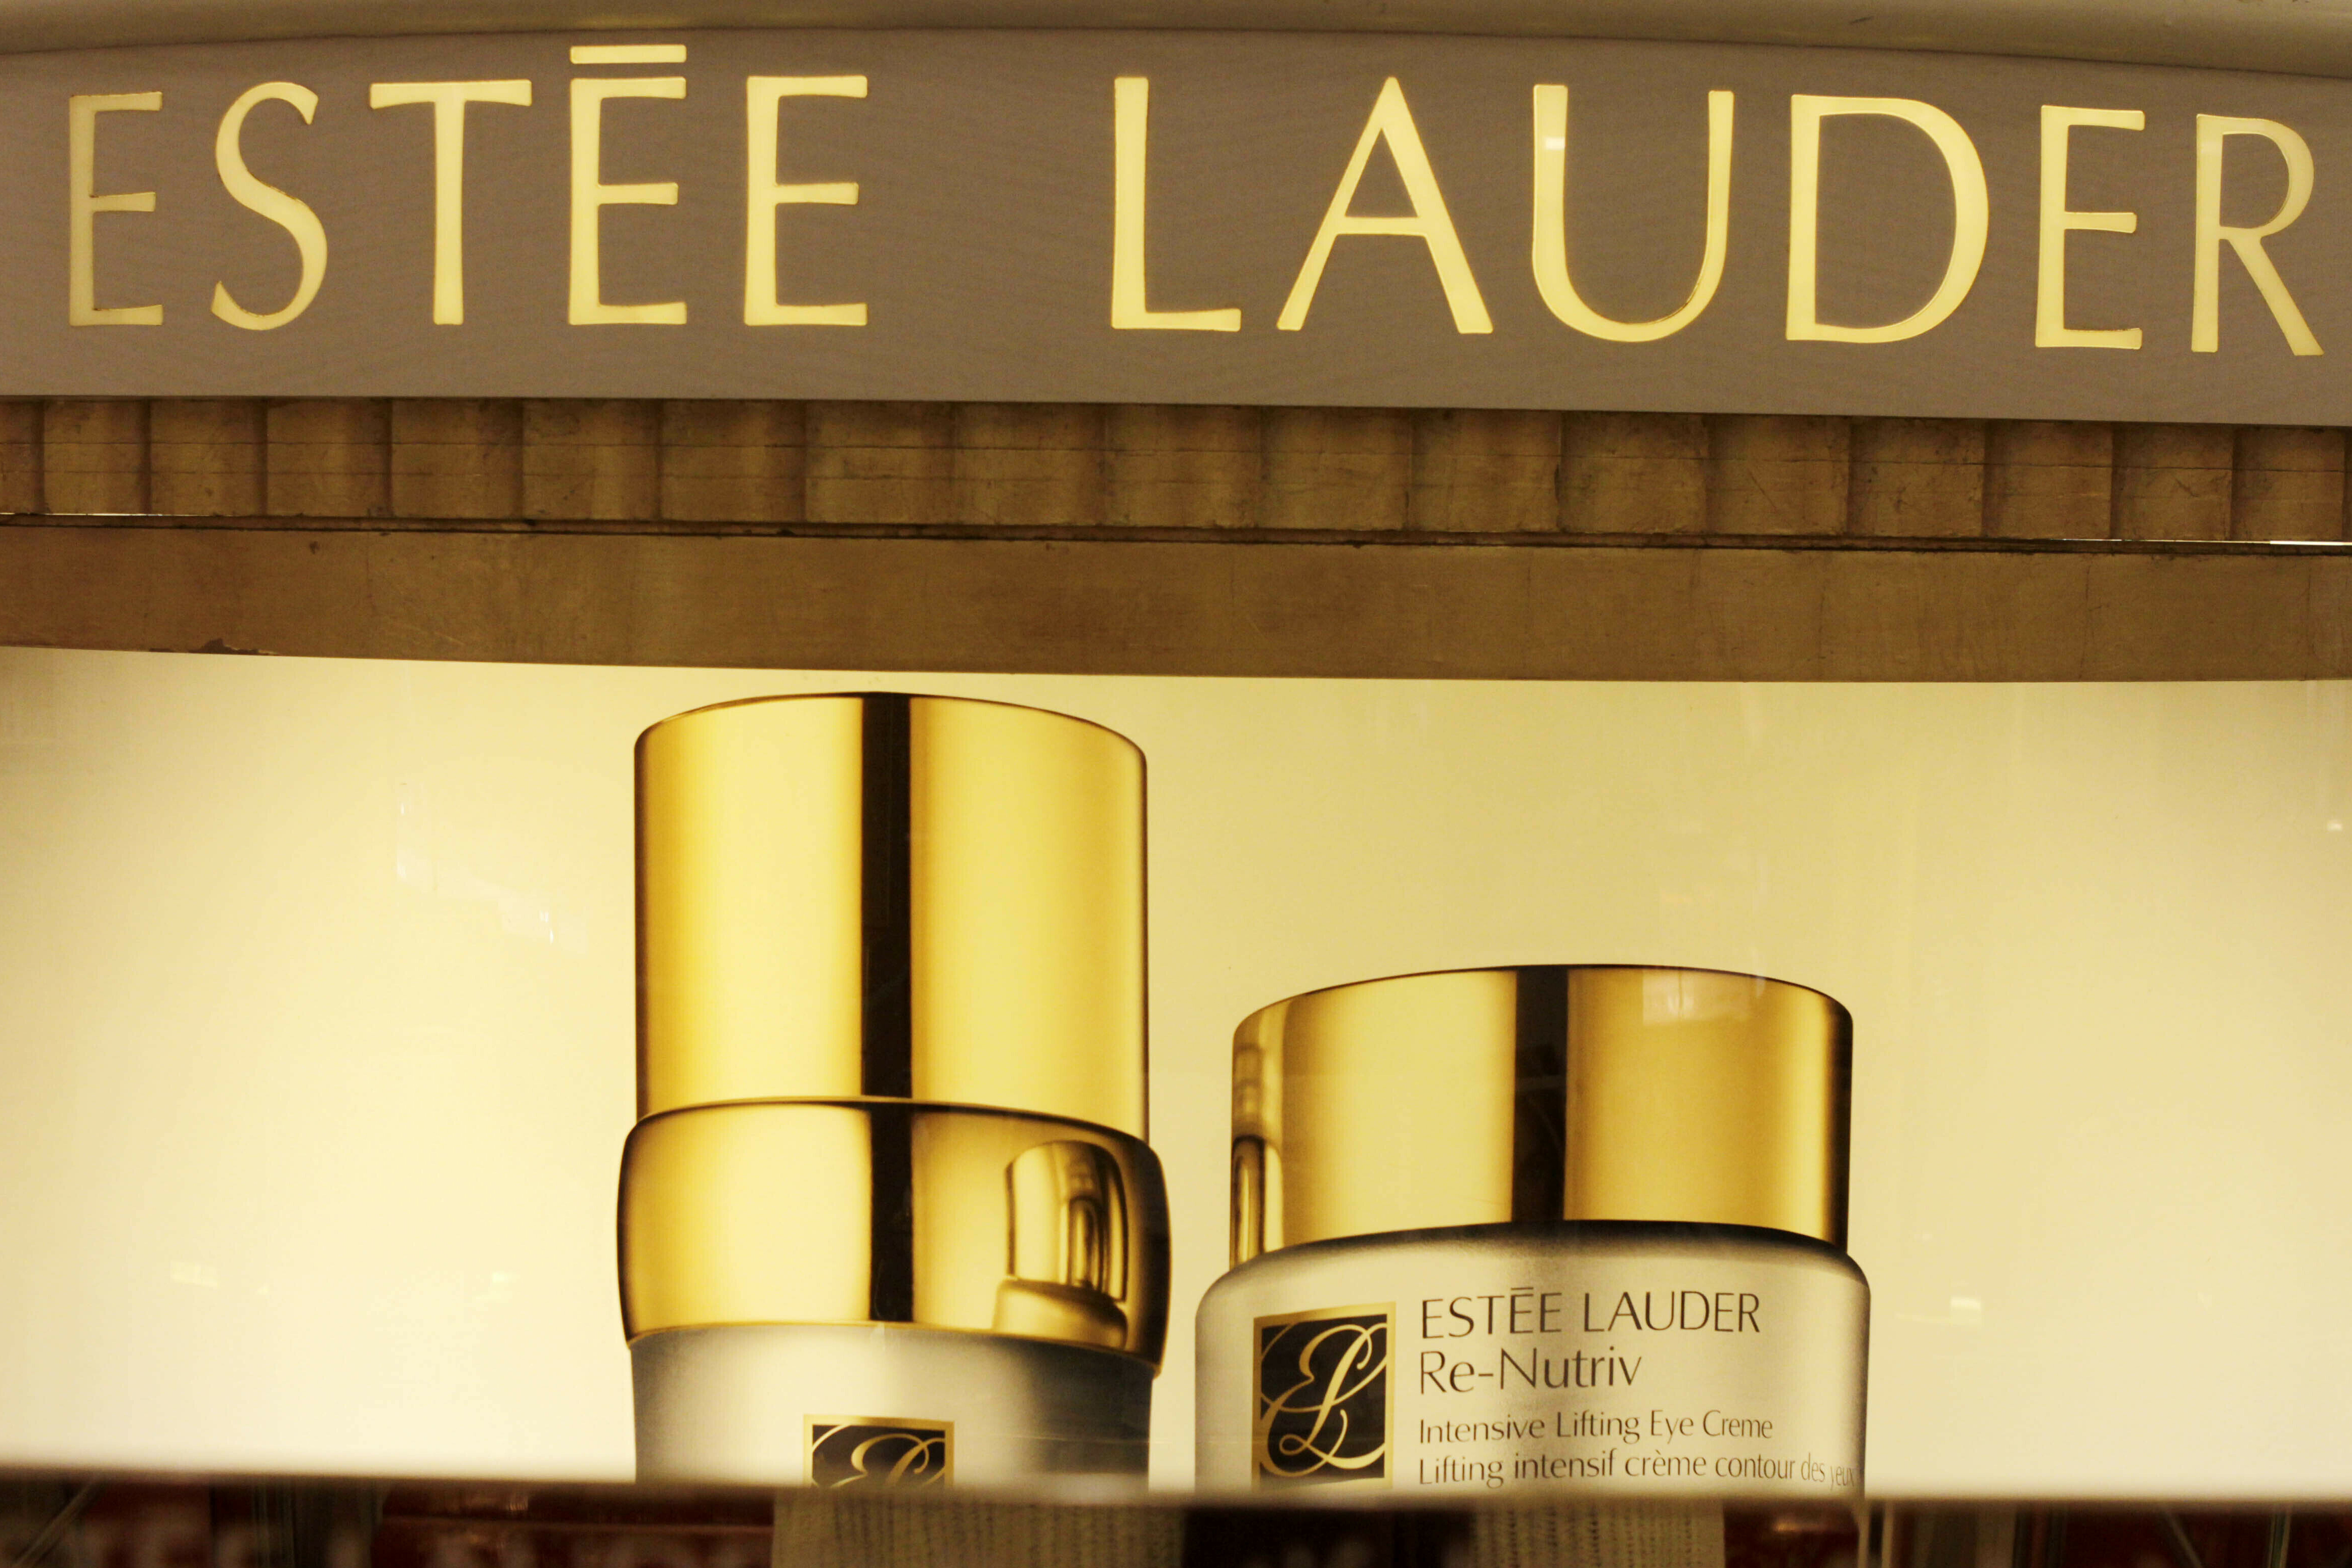 Estee Lauder buys American fashion label Tom Ford for $2.8 Billion deal